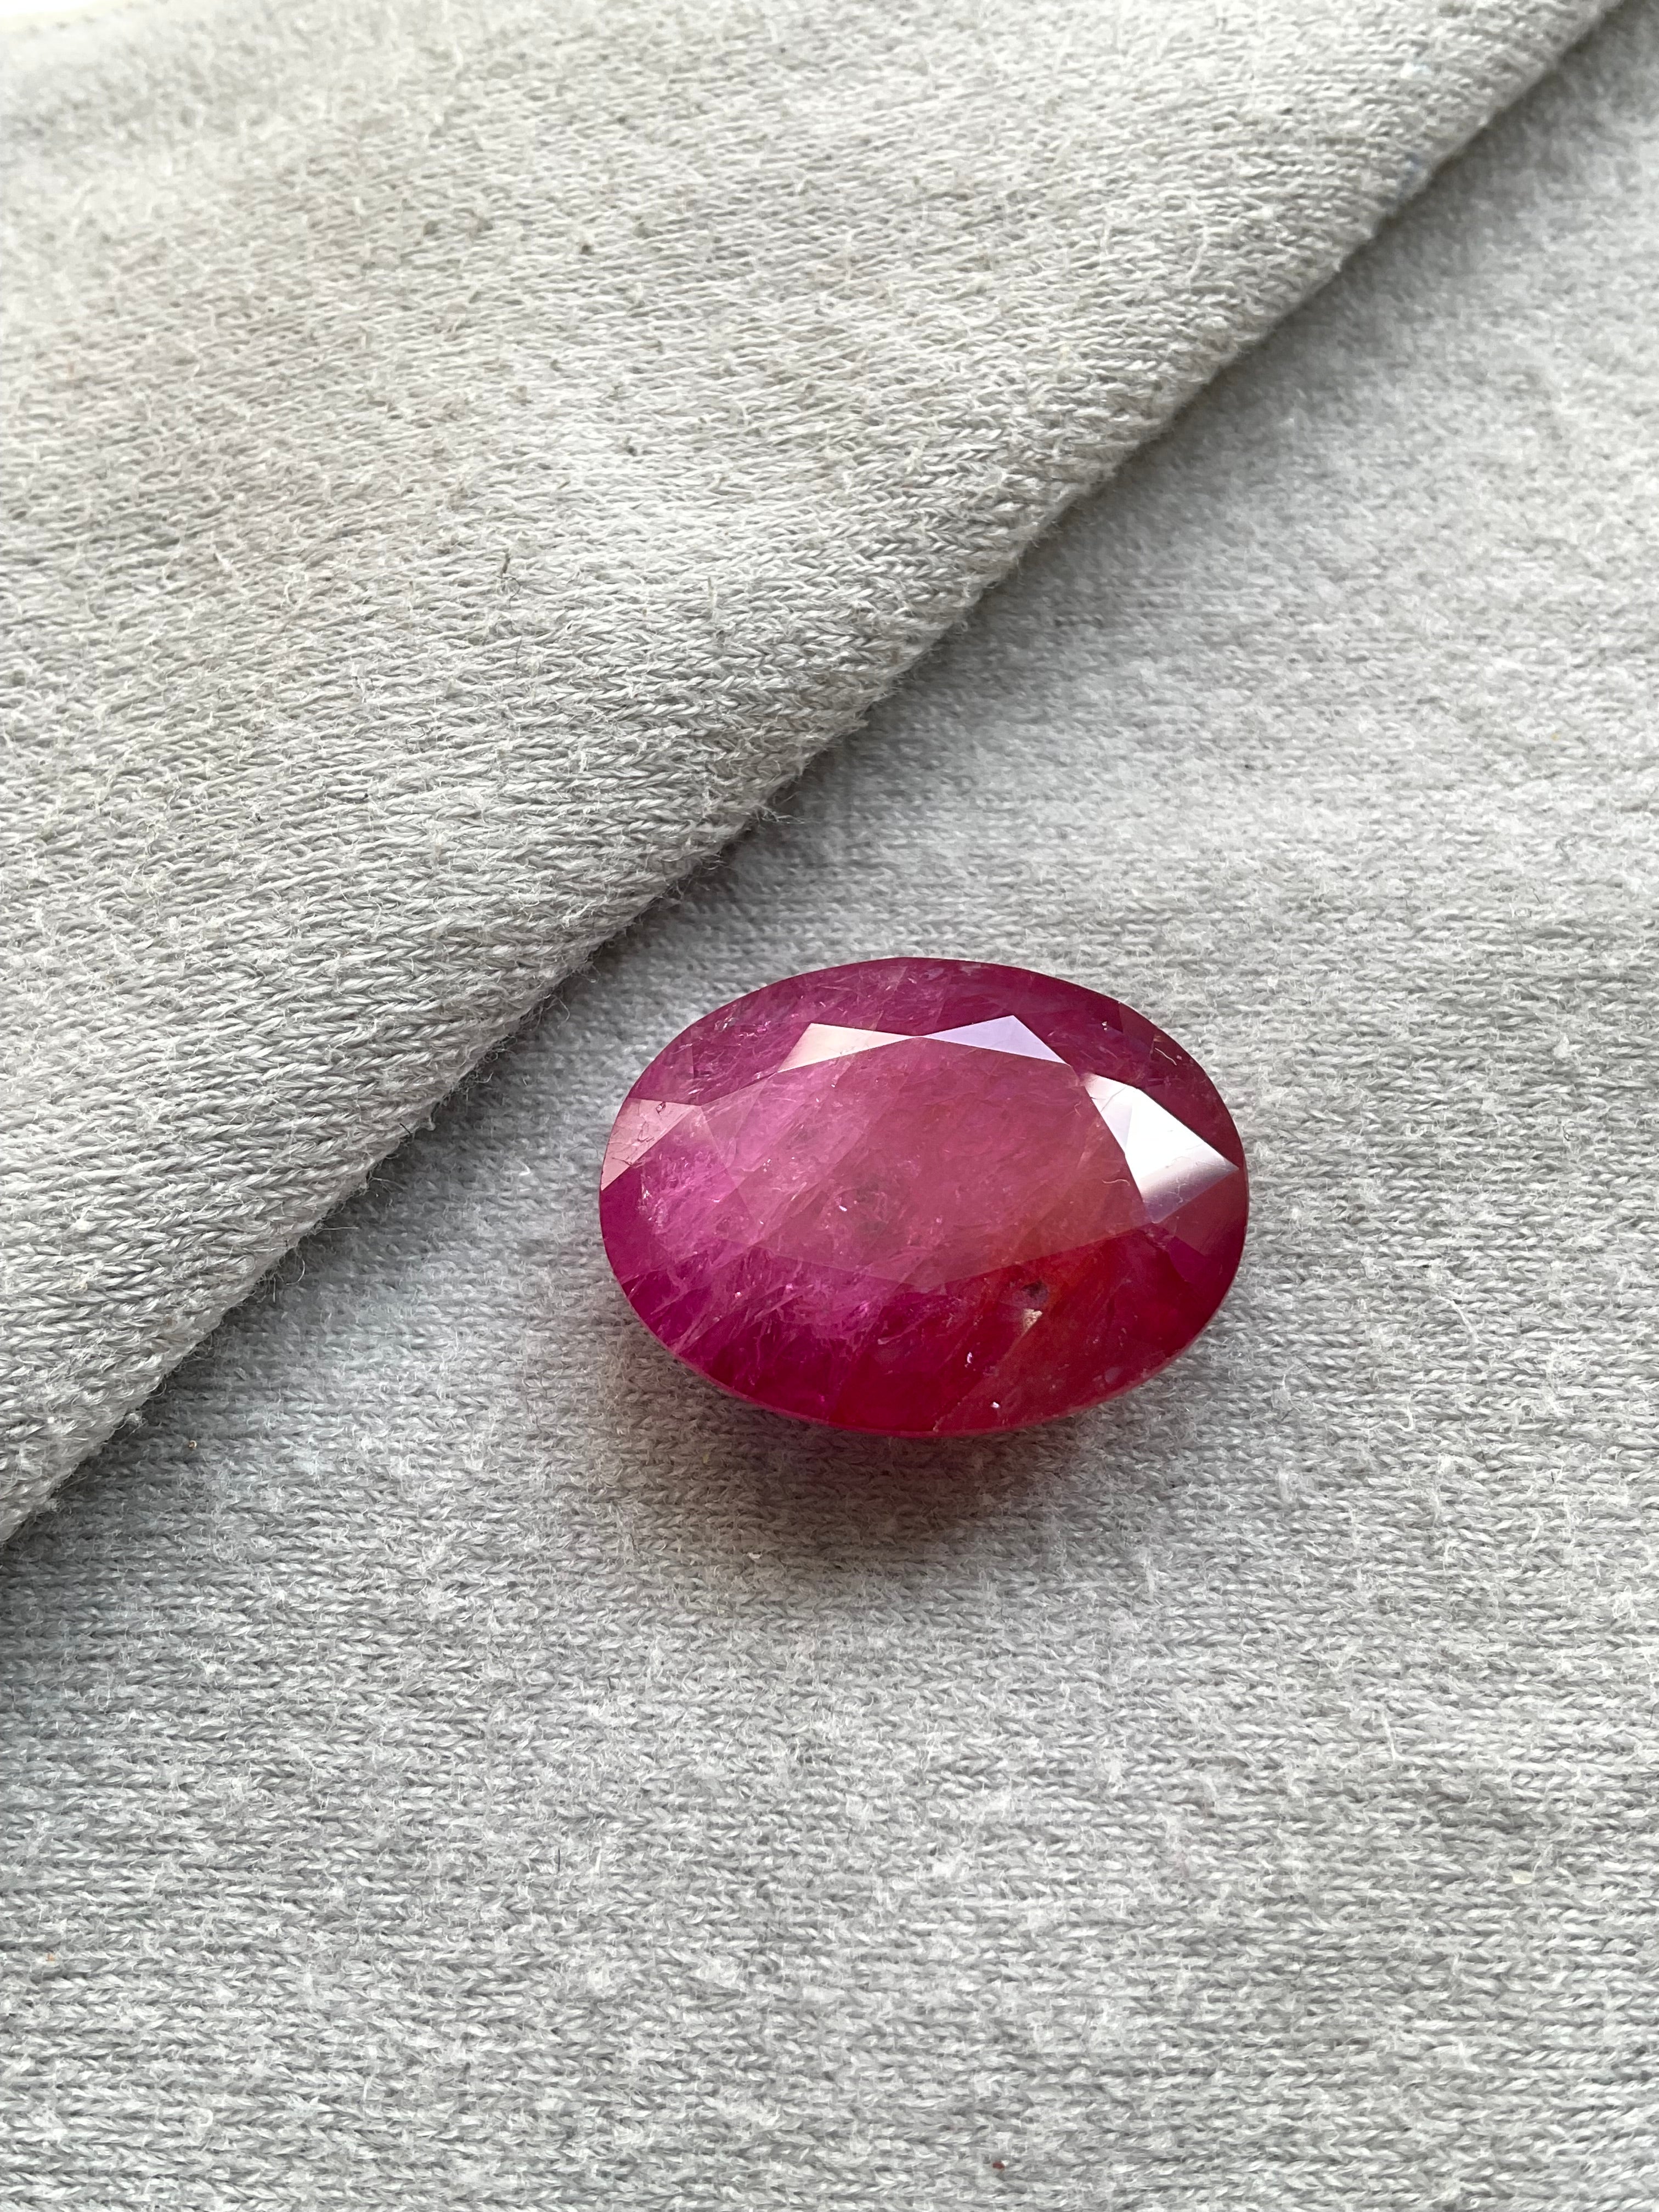 Very Rare Size RUBY !!!
As we are auction partners at Gemfields, we have sourced these rubies from winning auctions and had cut them in our in house manufacturing responsibly.

Weight: 23.46 Carats
Size: 21x16.5x6.7 MM
Pieces: 1
Shape: Faceted oval